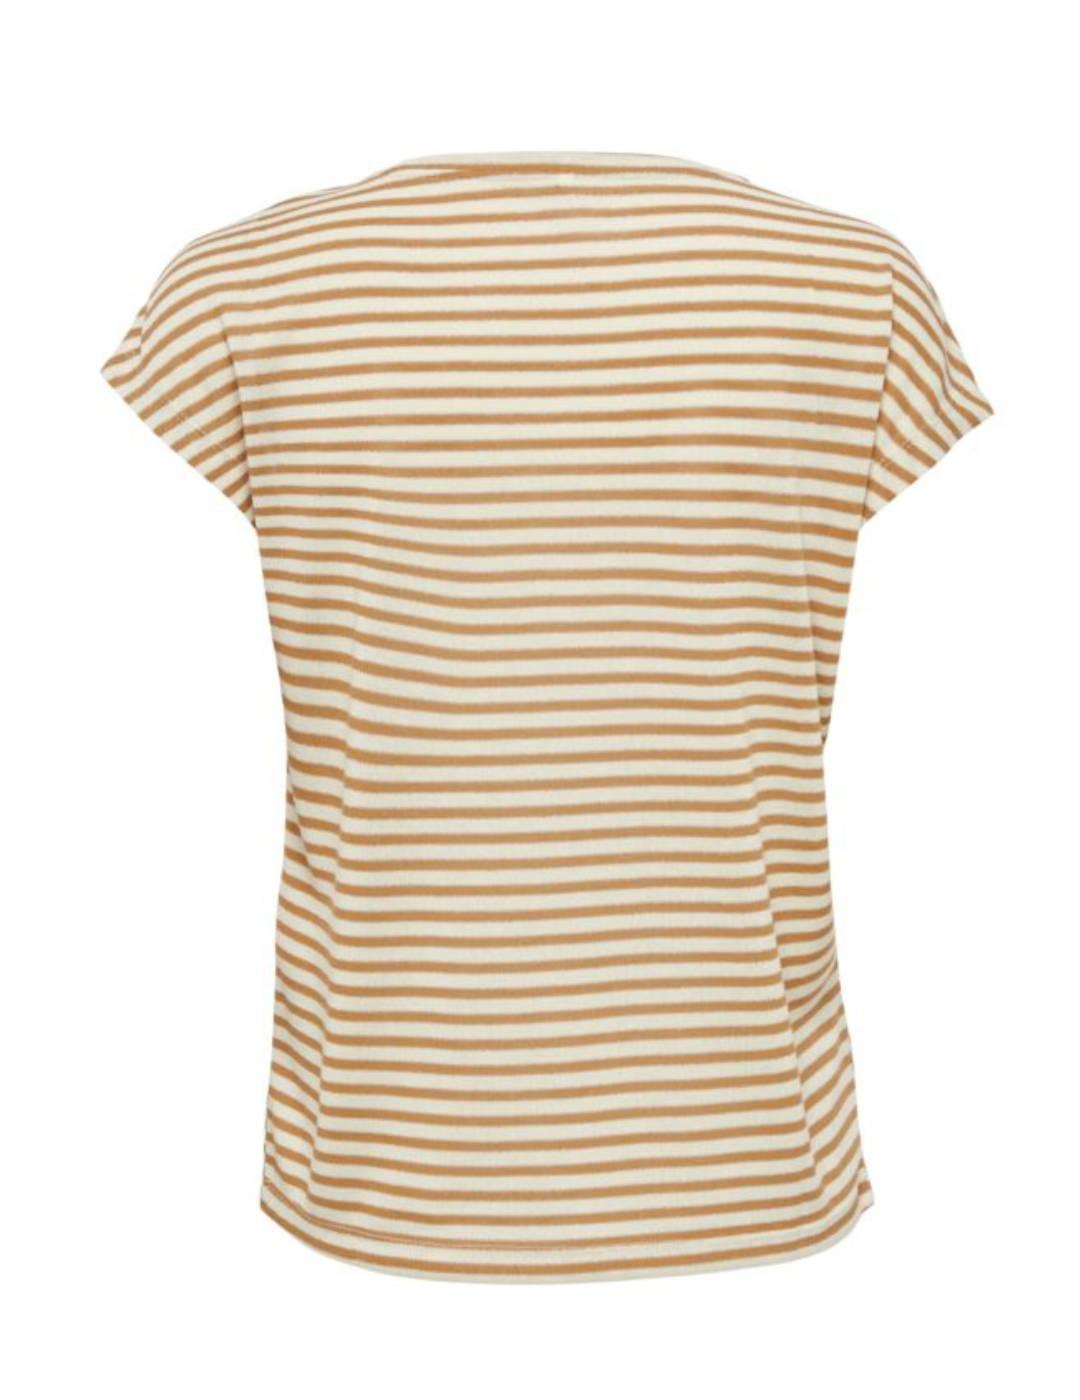 Camiseta Only Cannes beige y marrón a rayas para mujer